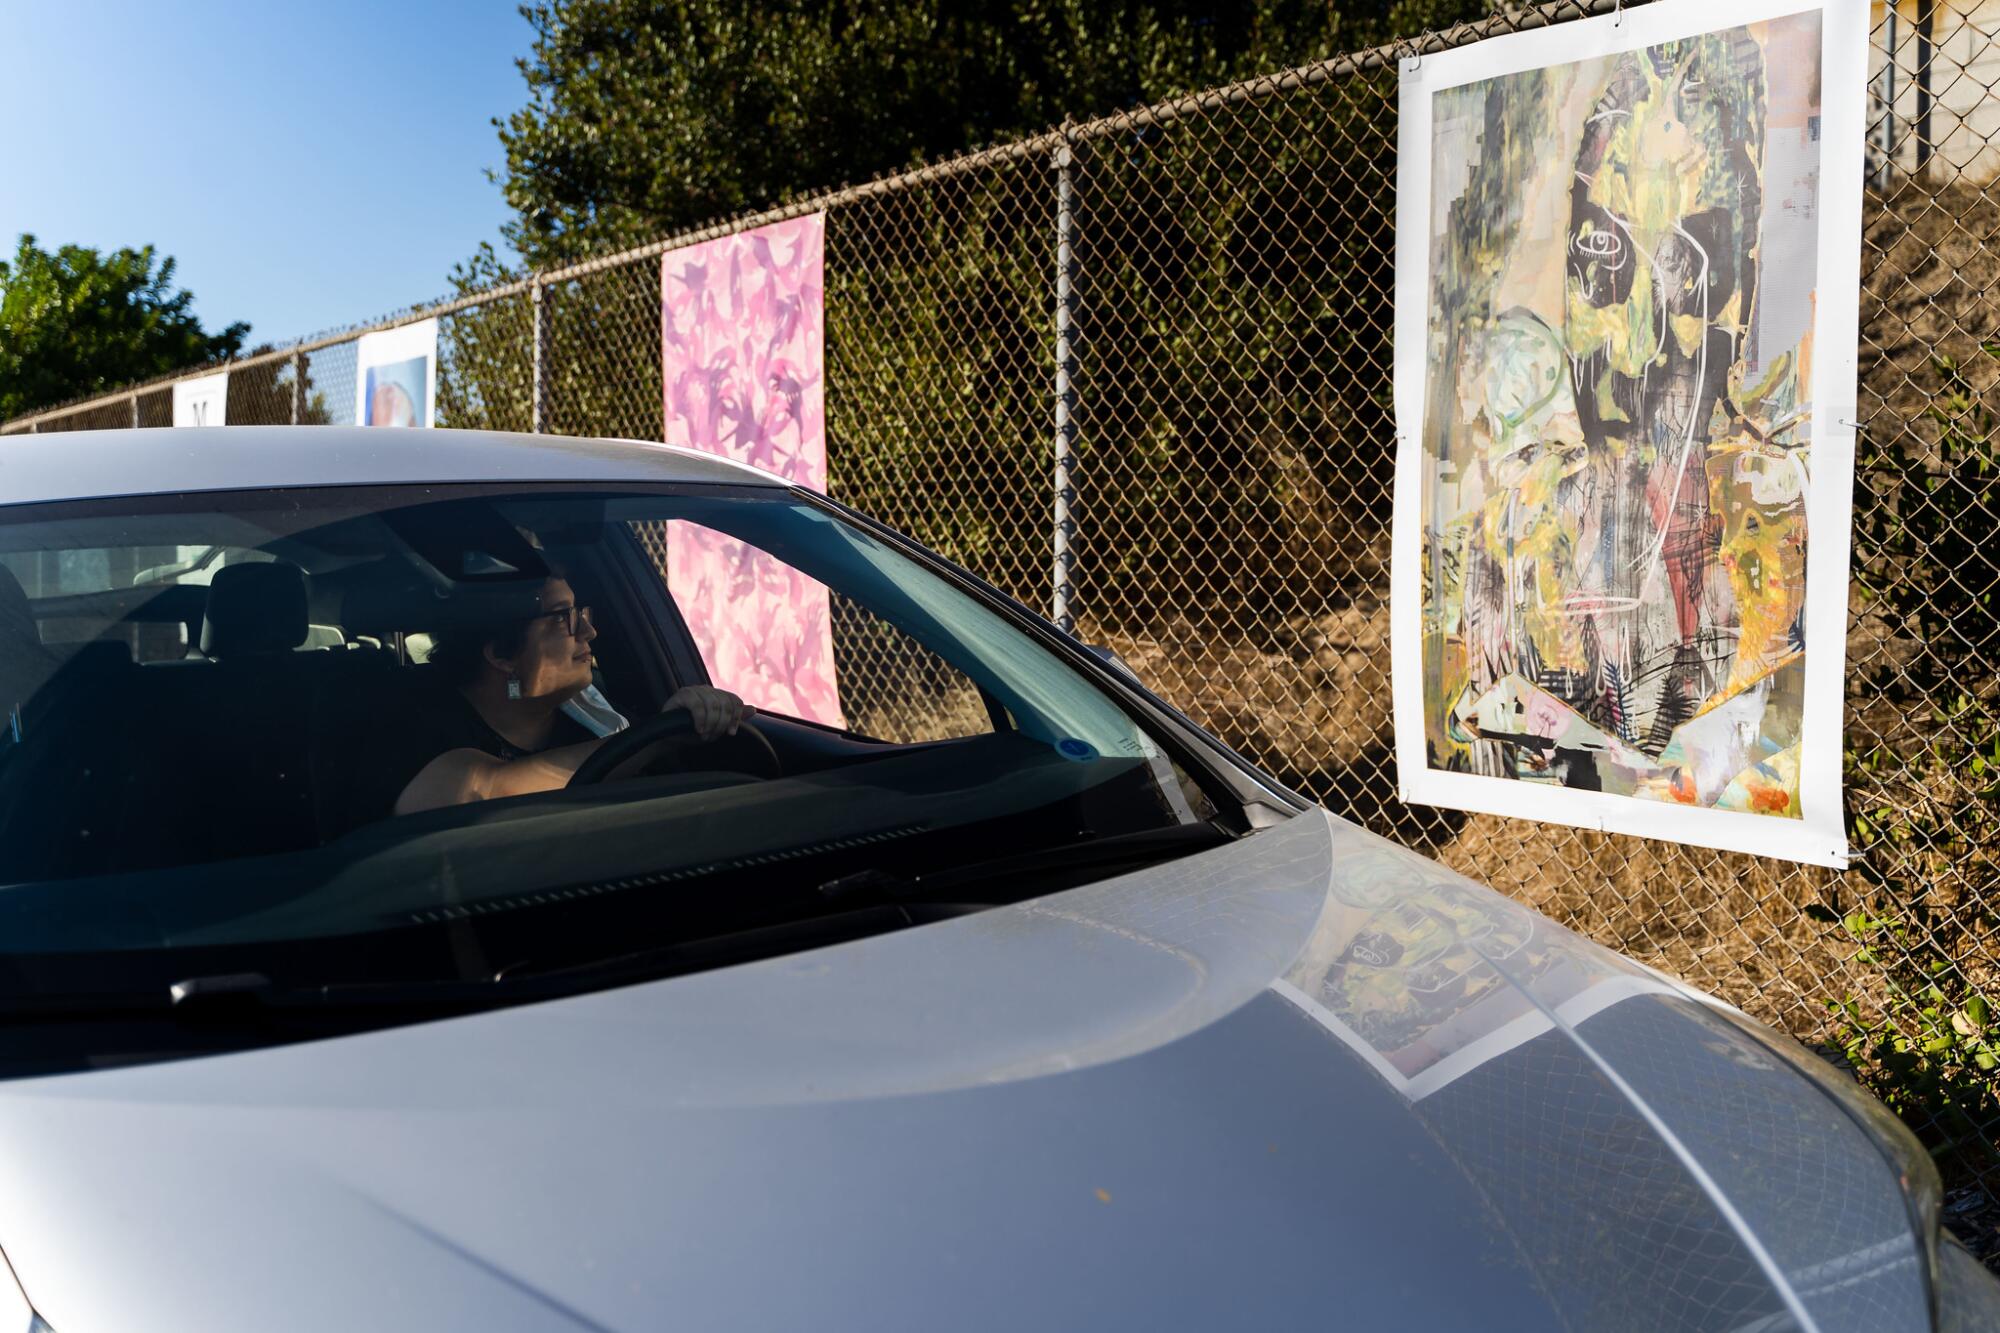 A driver takes in one of the pieces in Mesa College's drive-thru art exhibition "Mesa Drive-In."